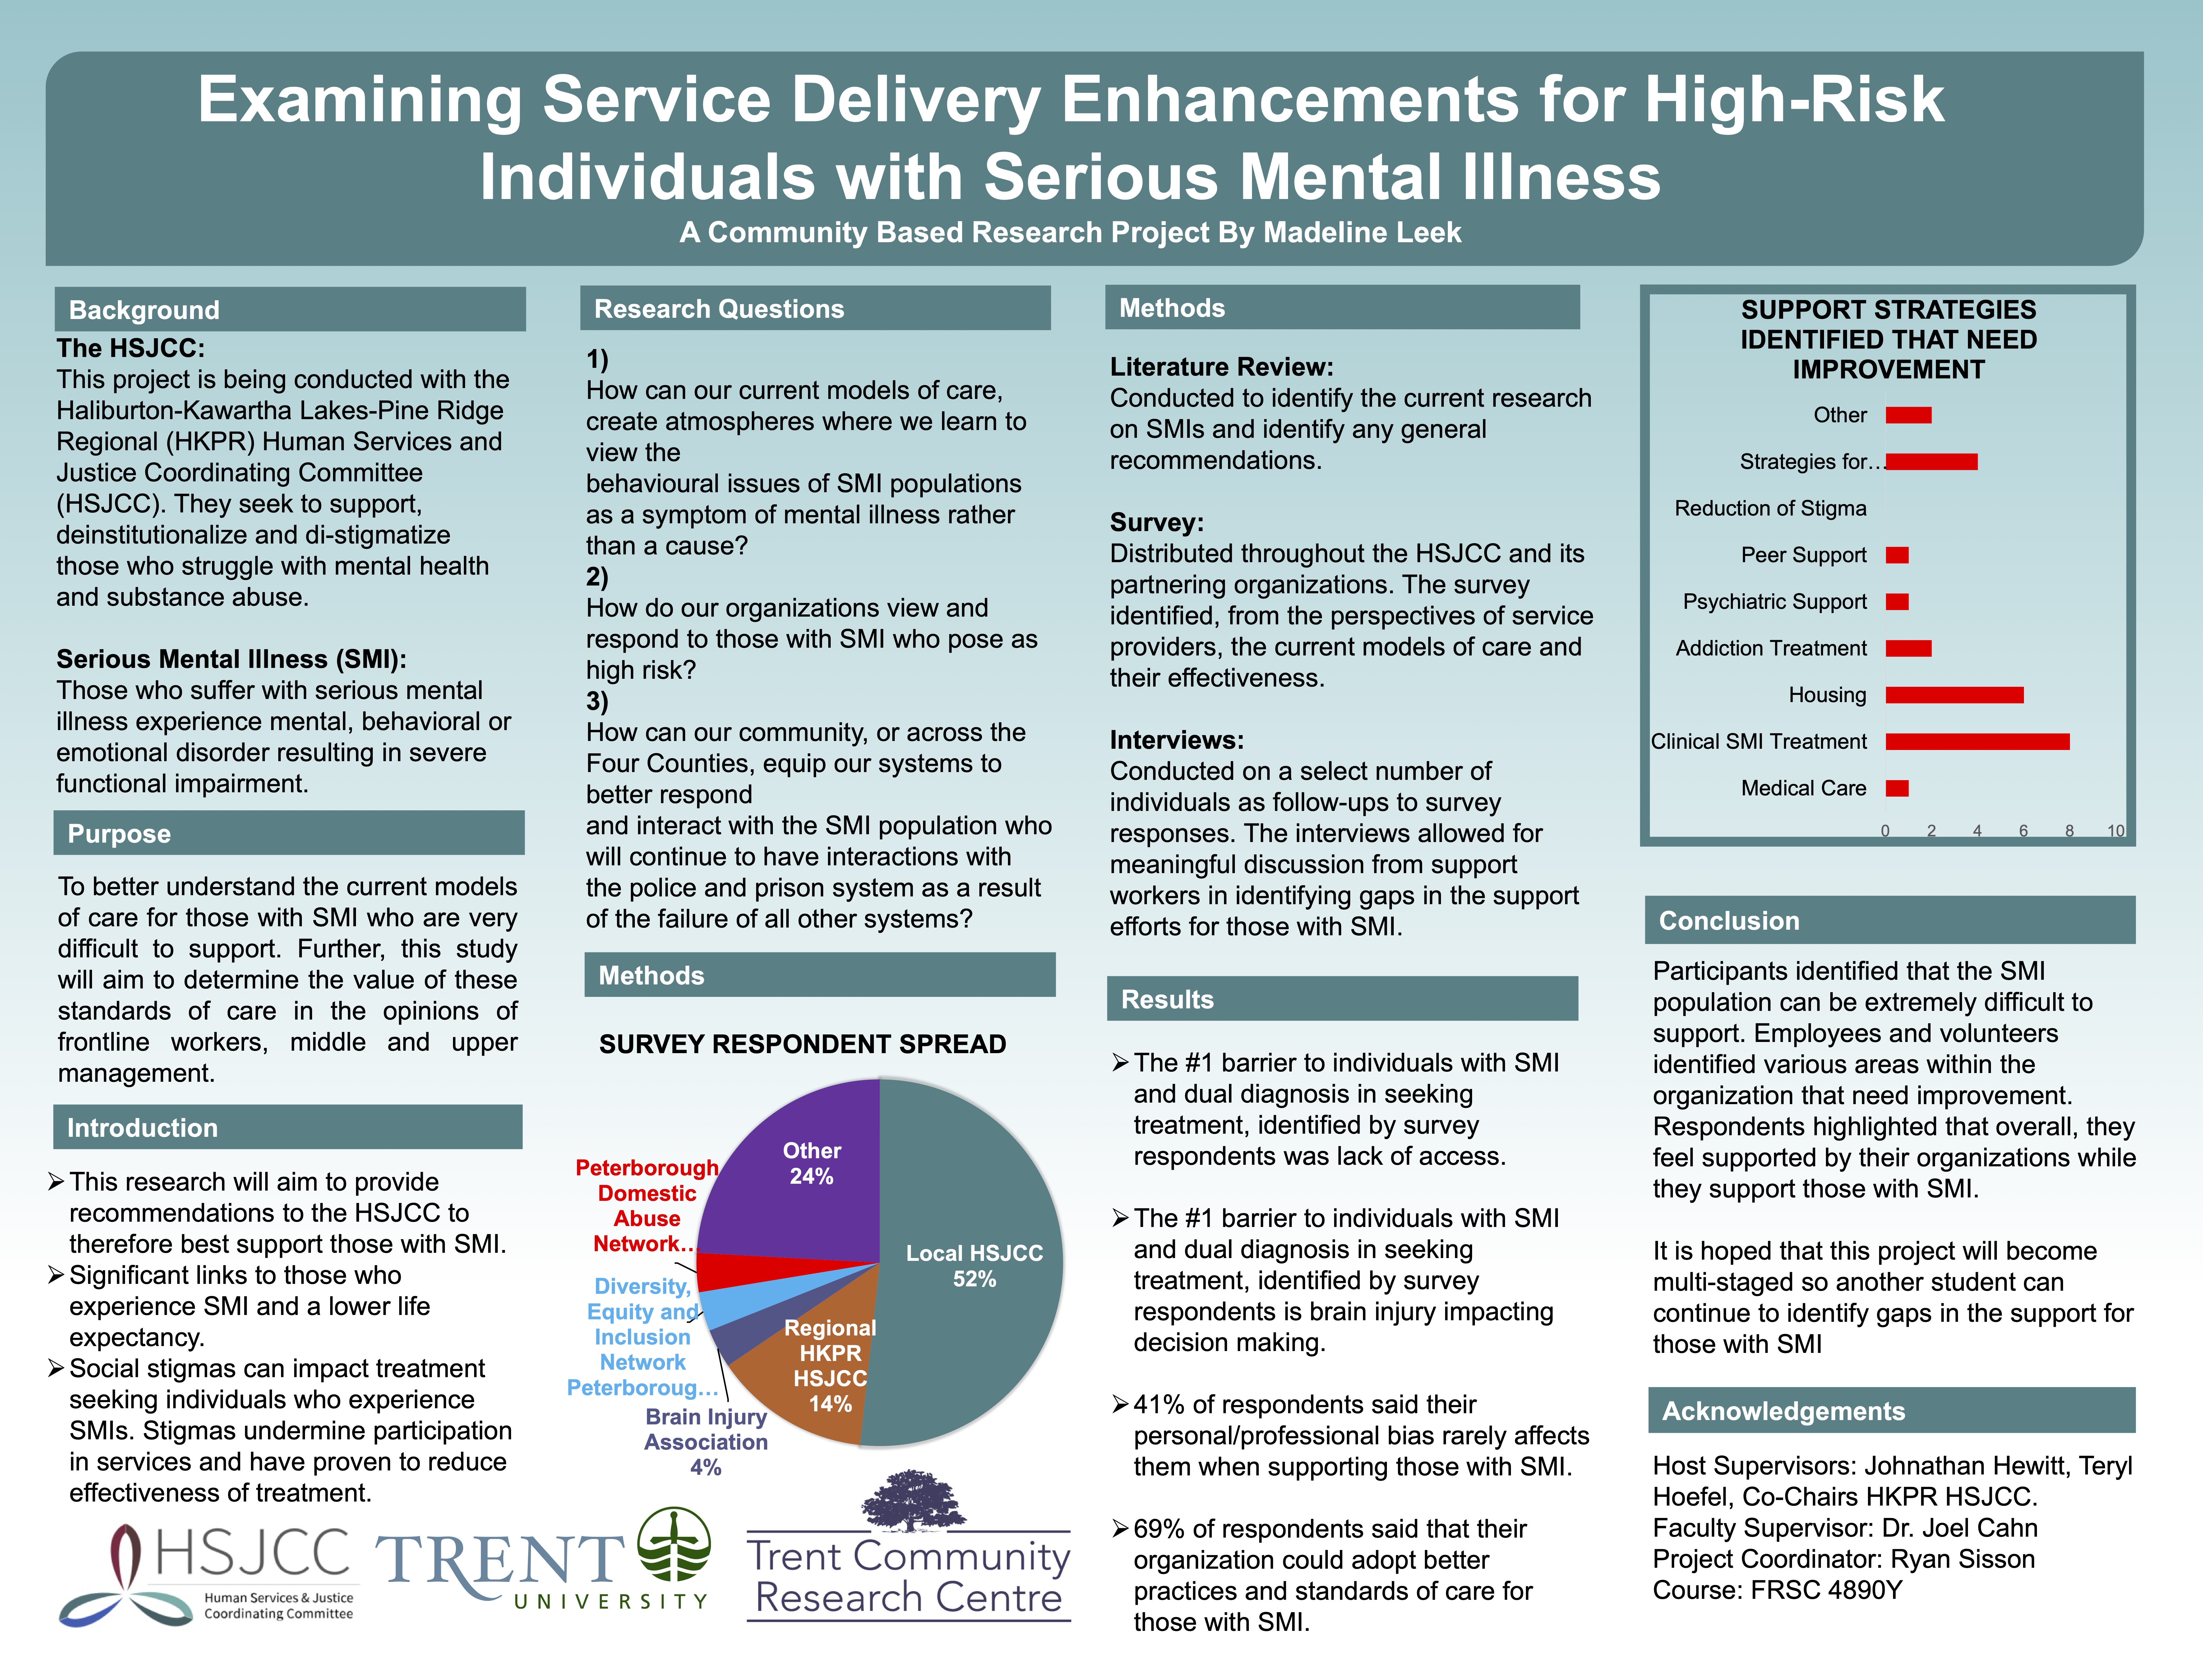 Research Poster for Examining Service Delivery Enhancements for High-Risk Individuals with Serious Mental Illness